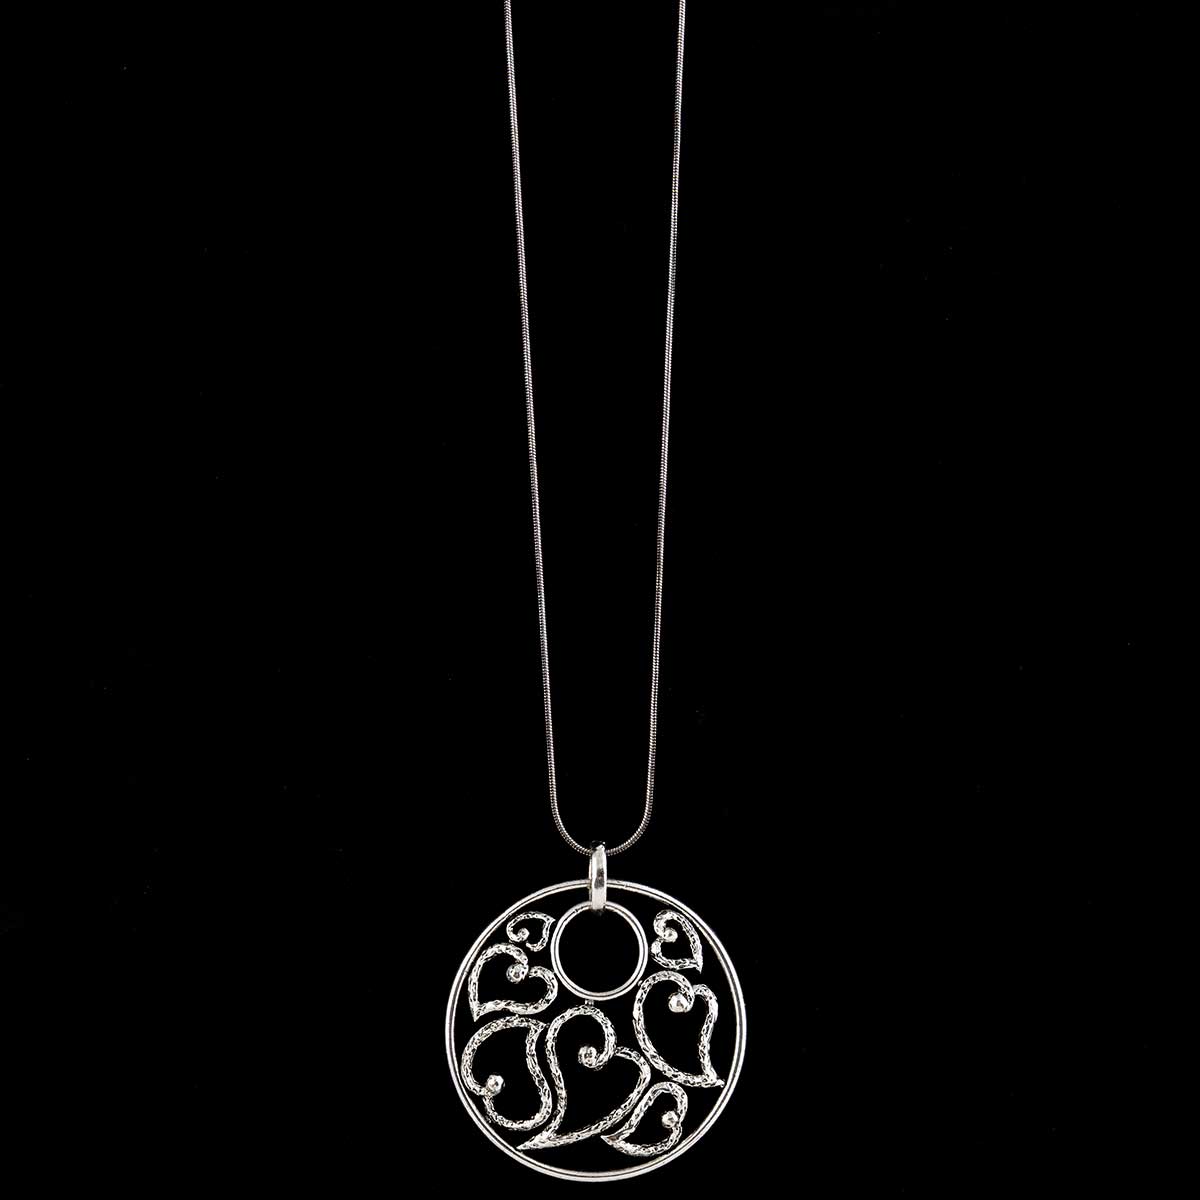 b70 NECKLACE ROUND HEART MEDALLION 30IN/3IN X 3IN